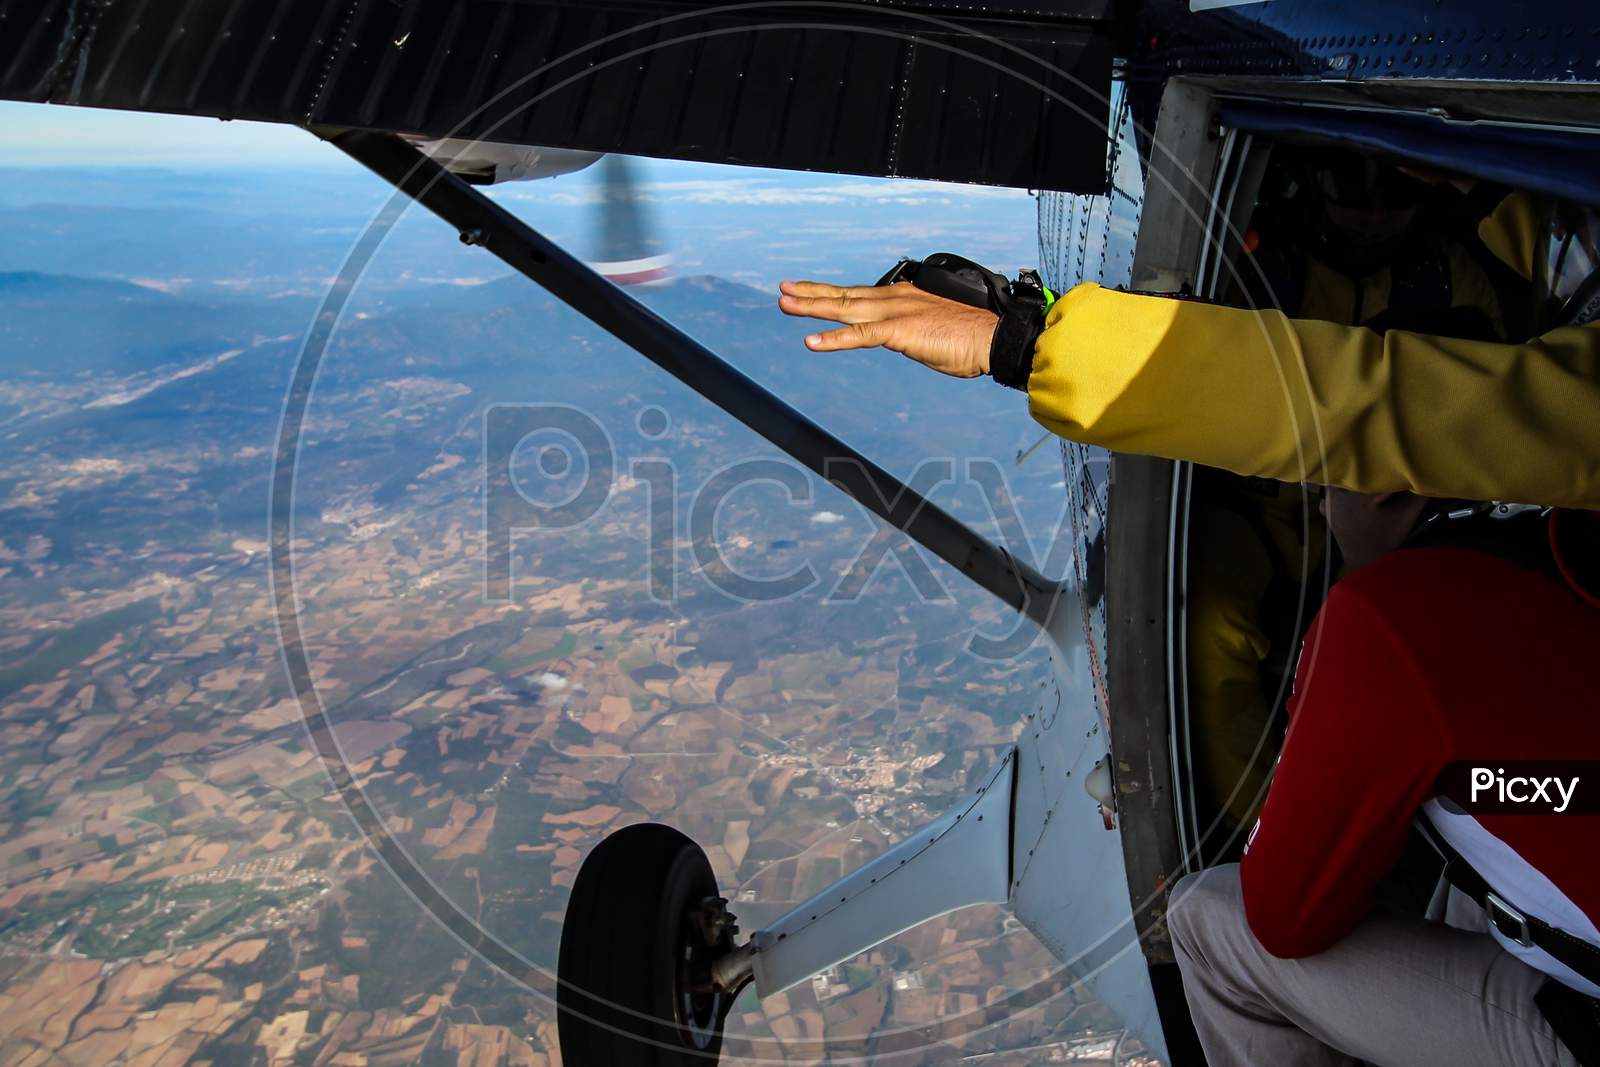 Man Poses For Skydiving In Plane Before Jump.